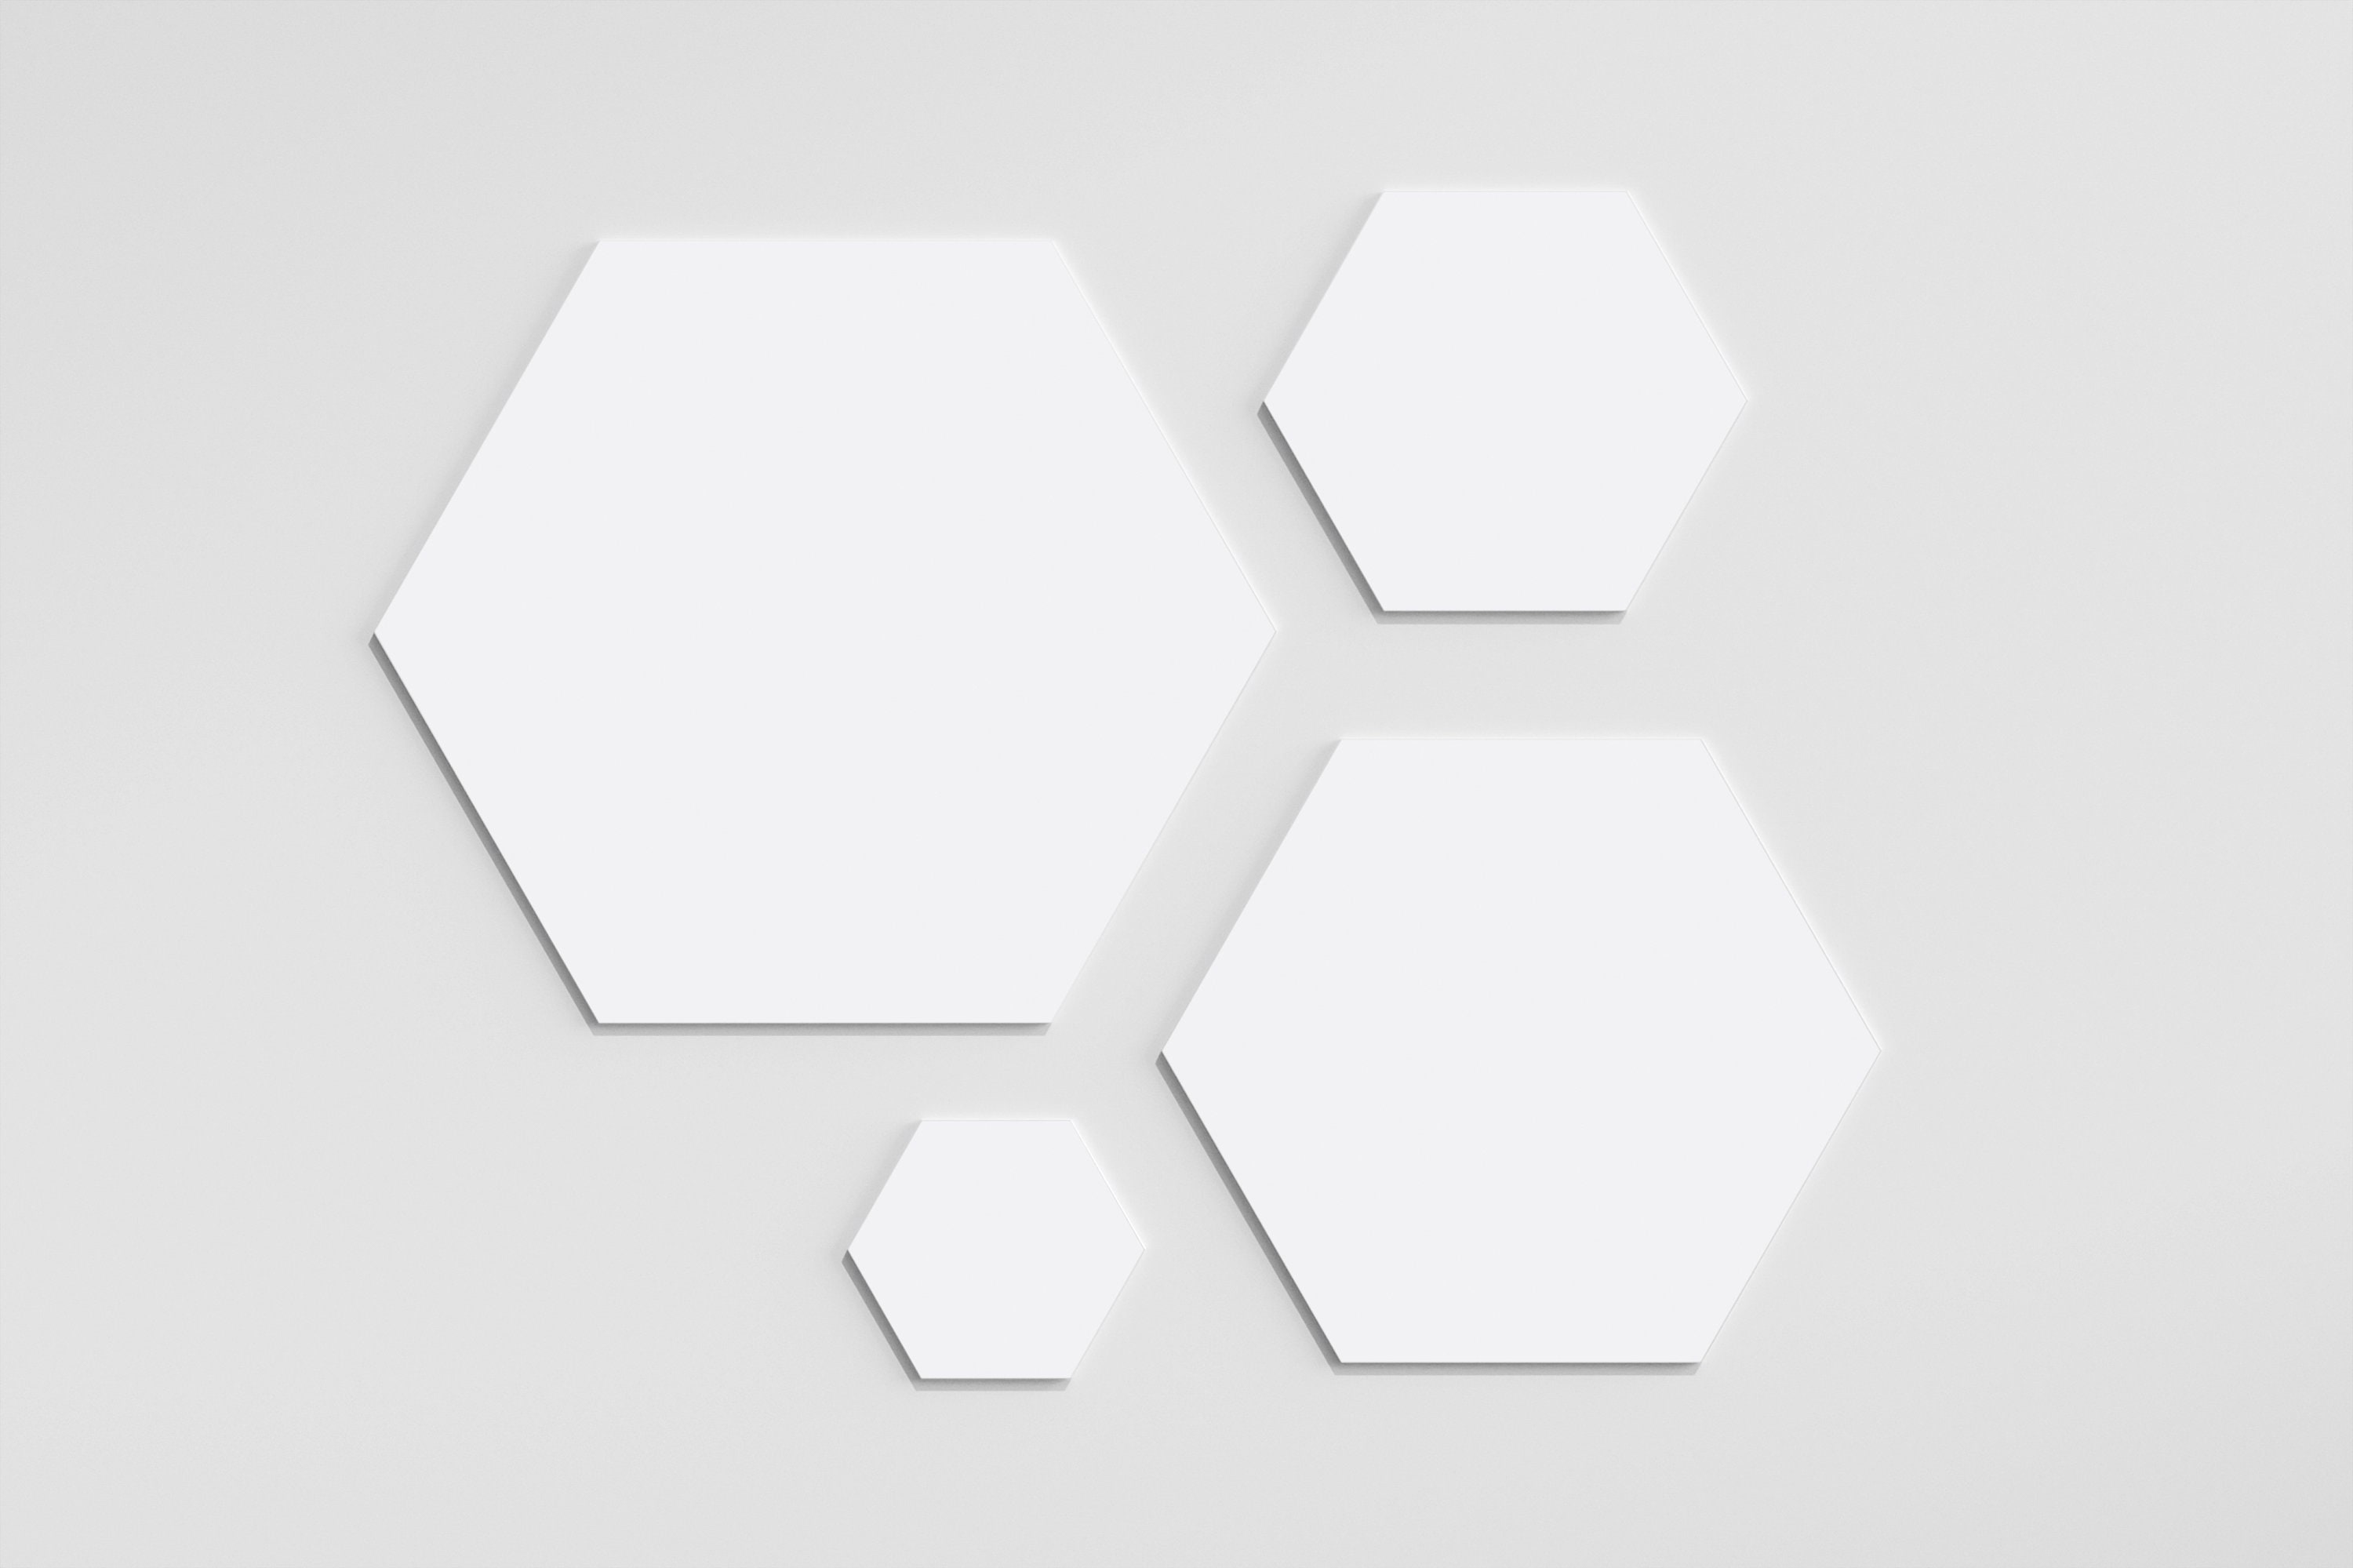 White Hexagon Acrylic Blanks | Hex For Diy Wedding Kits & Crafts. Available in Large, Small Custom Sizes